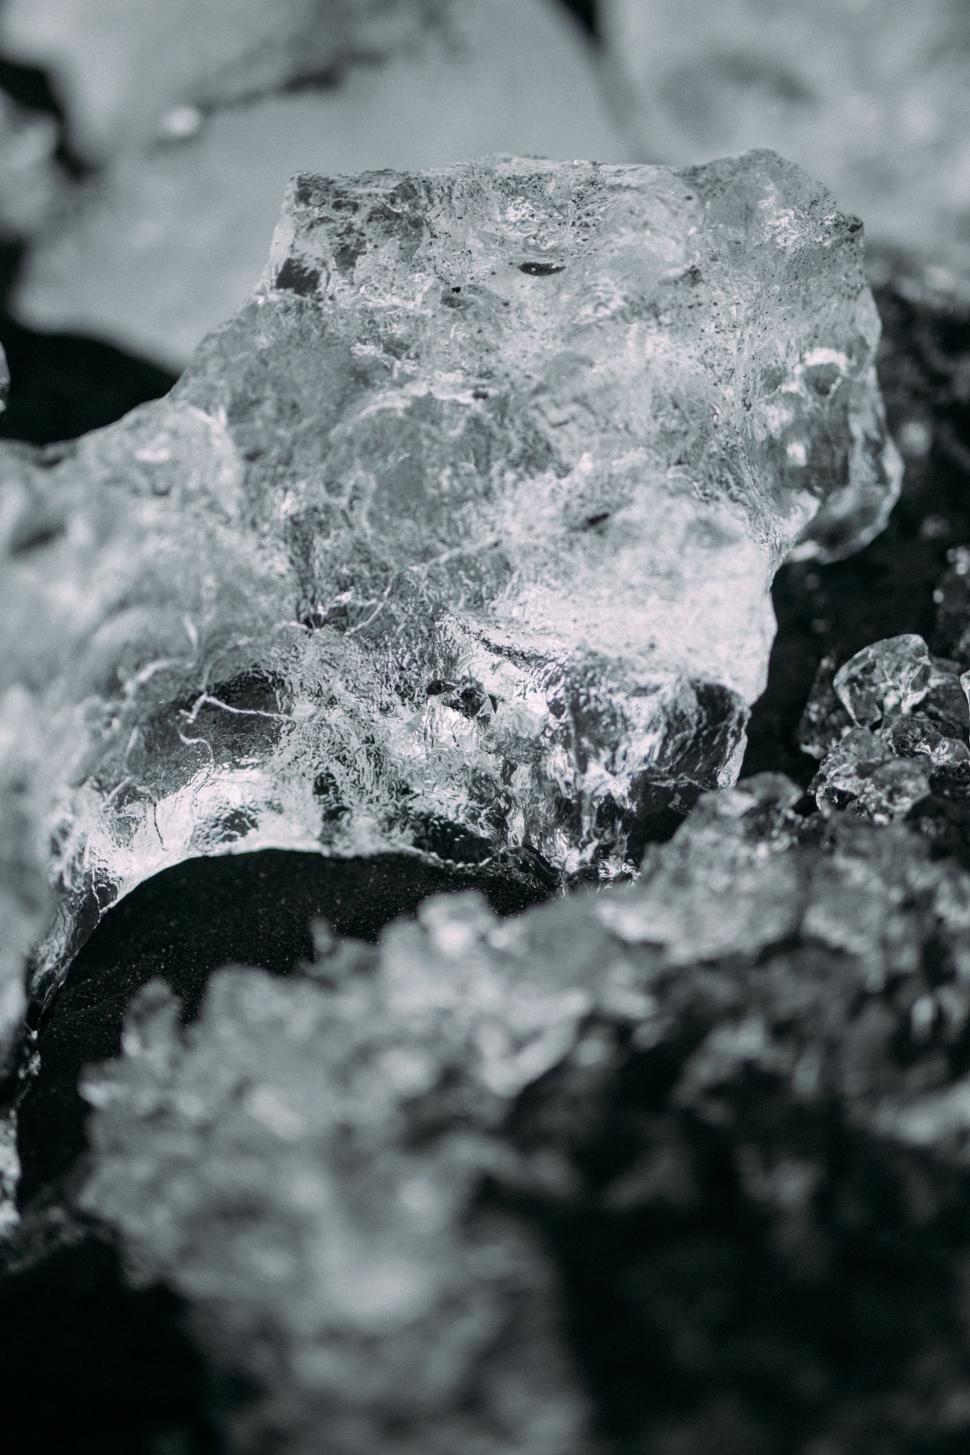 Free Image of Ice Crystals Forming in Black and White 